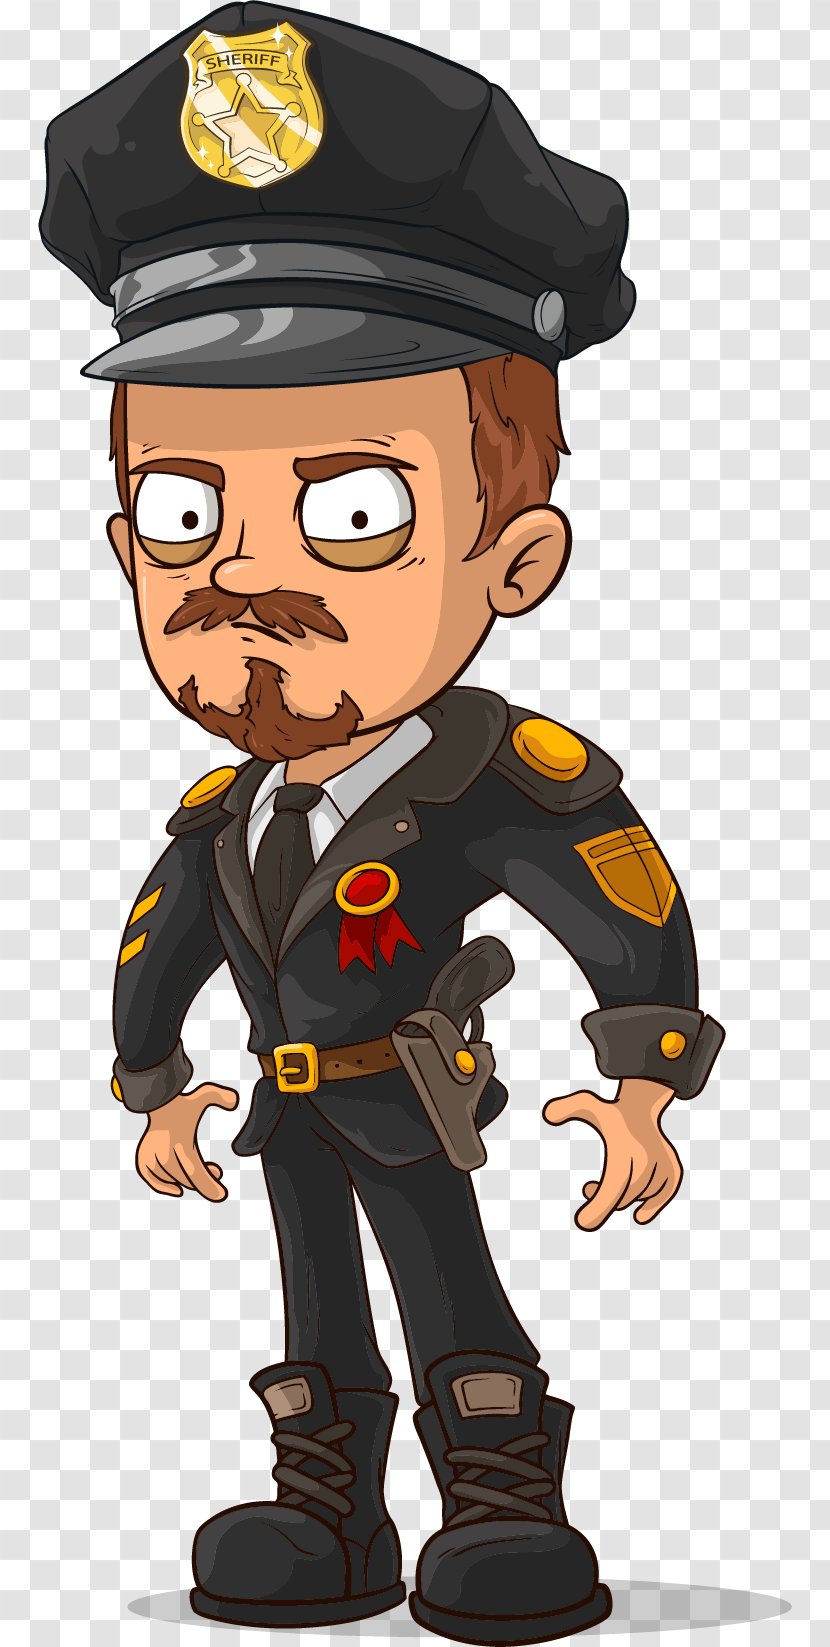 Police Officer Cartoon Royalty-free - Drawing - Vector Hand-painted Transparent PNG